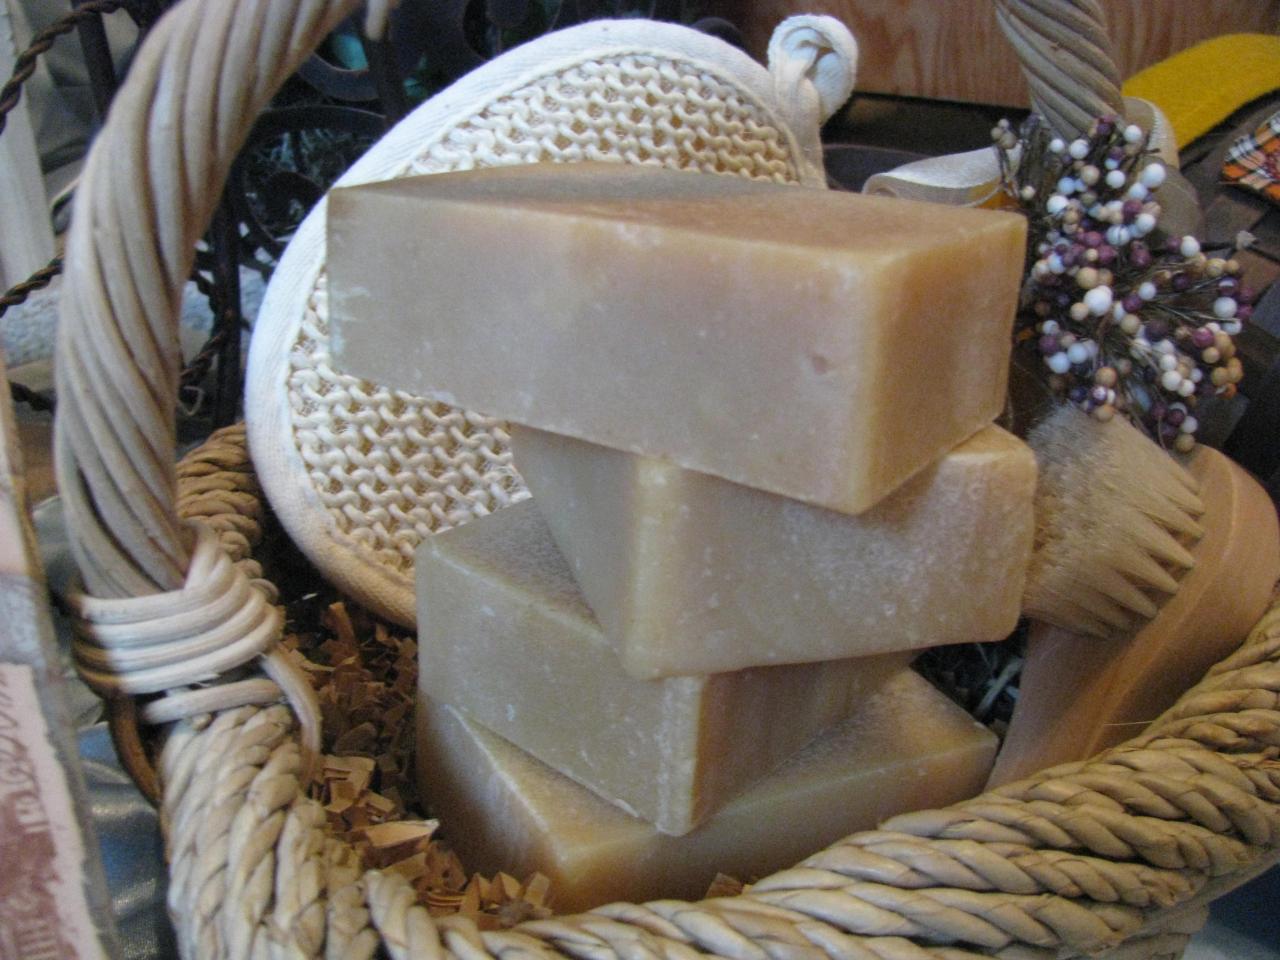 1 Each Large Soap Bar Luxurious Handcrafted Cold-process Soaps Only Premium Butters And Oils And Real Honey